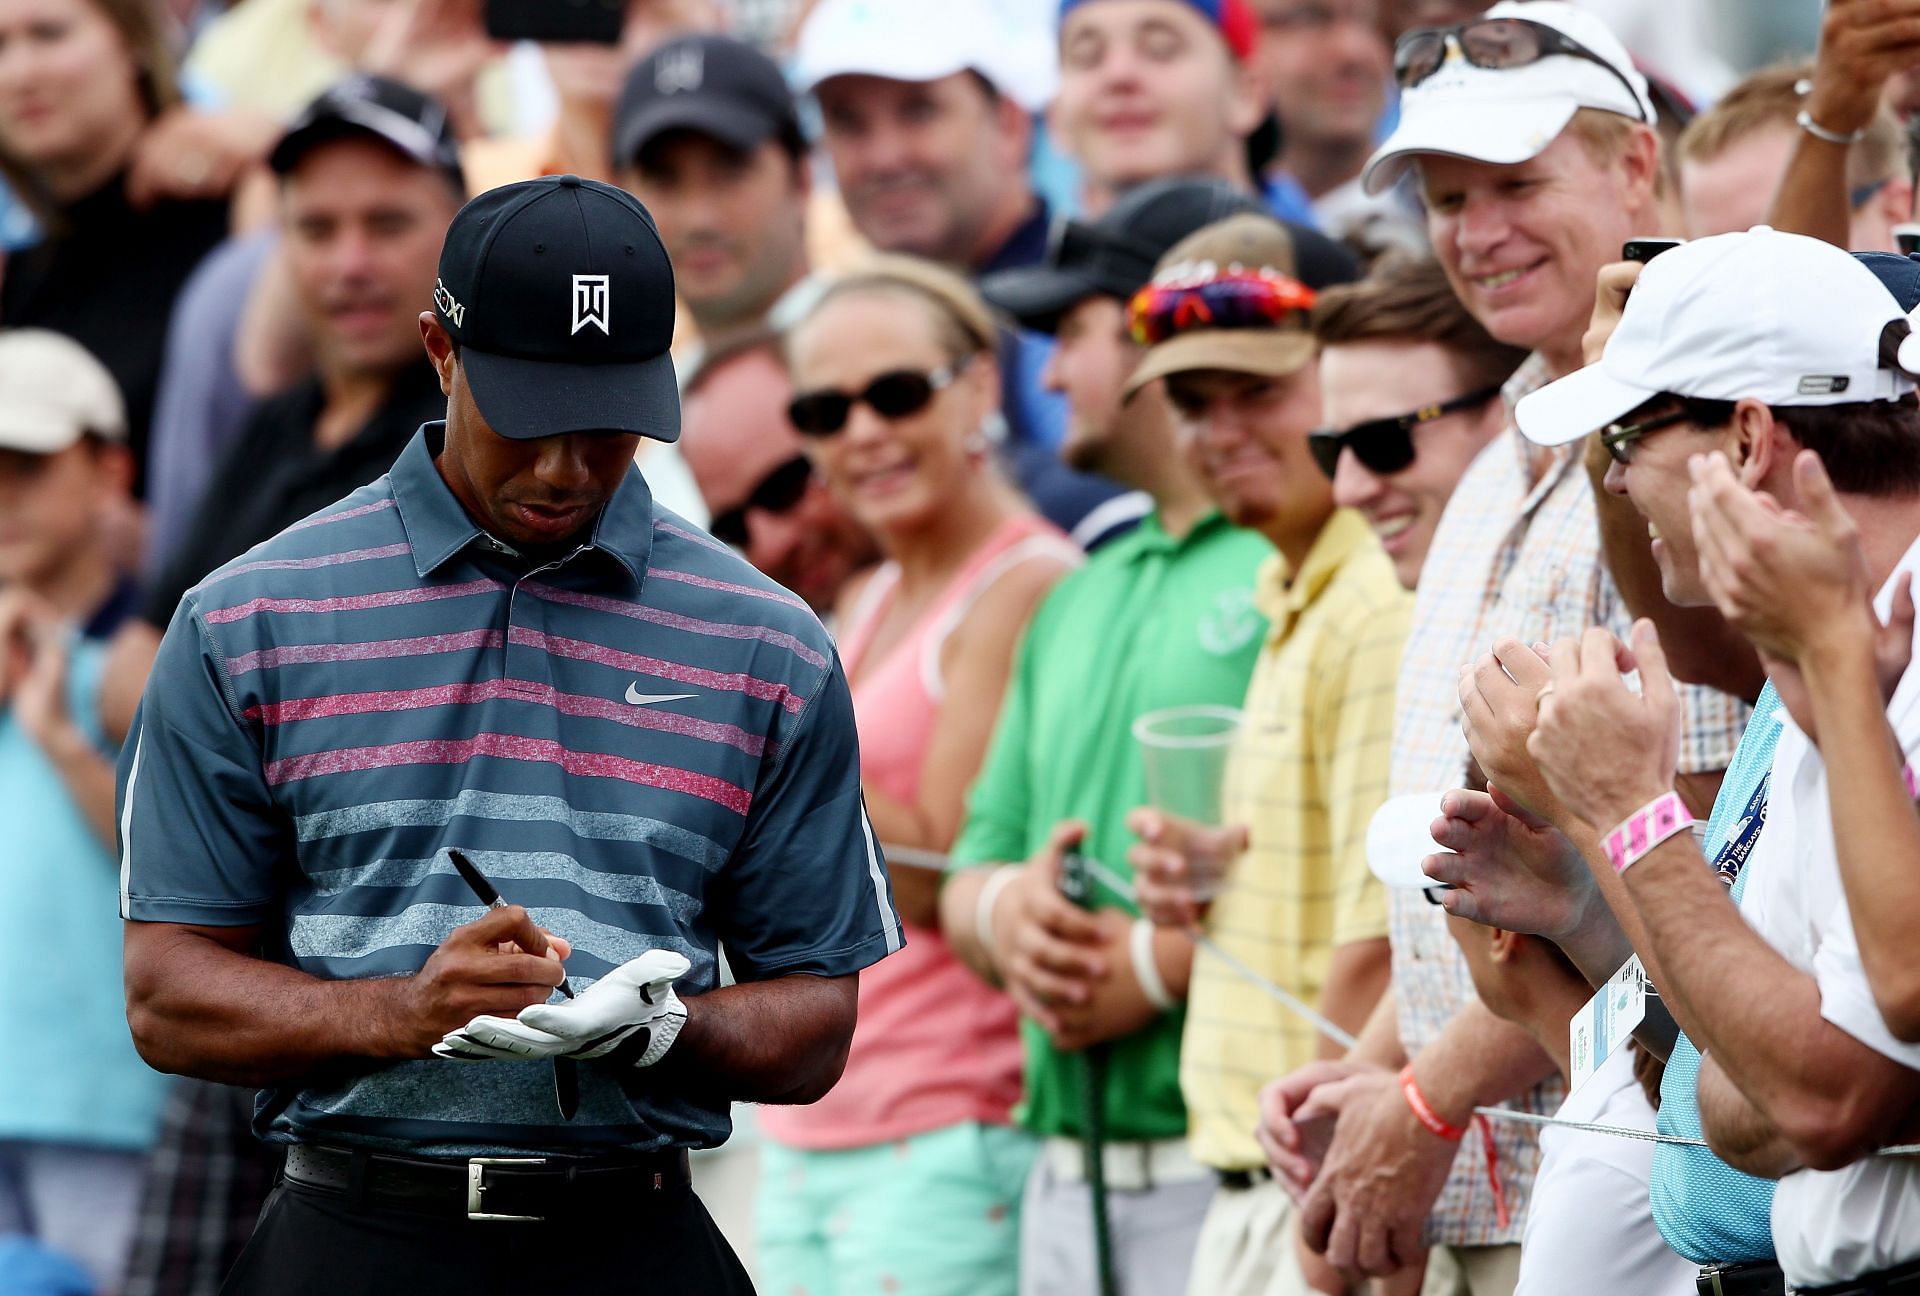 Tiger Woods signs his glove to give to a fan in 2013 (Image via Alex Trautwig/Getty Images)